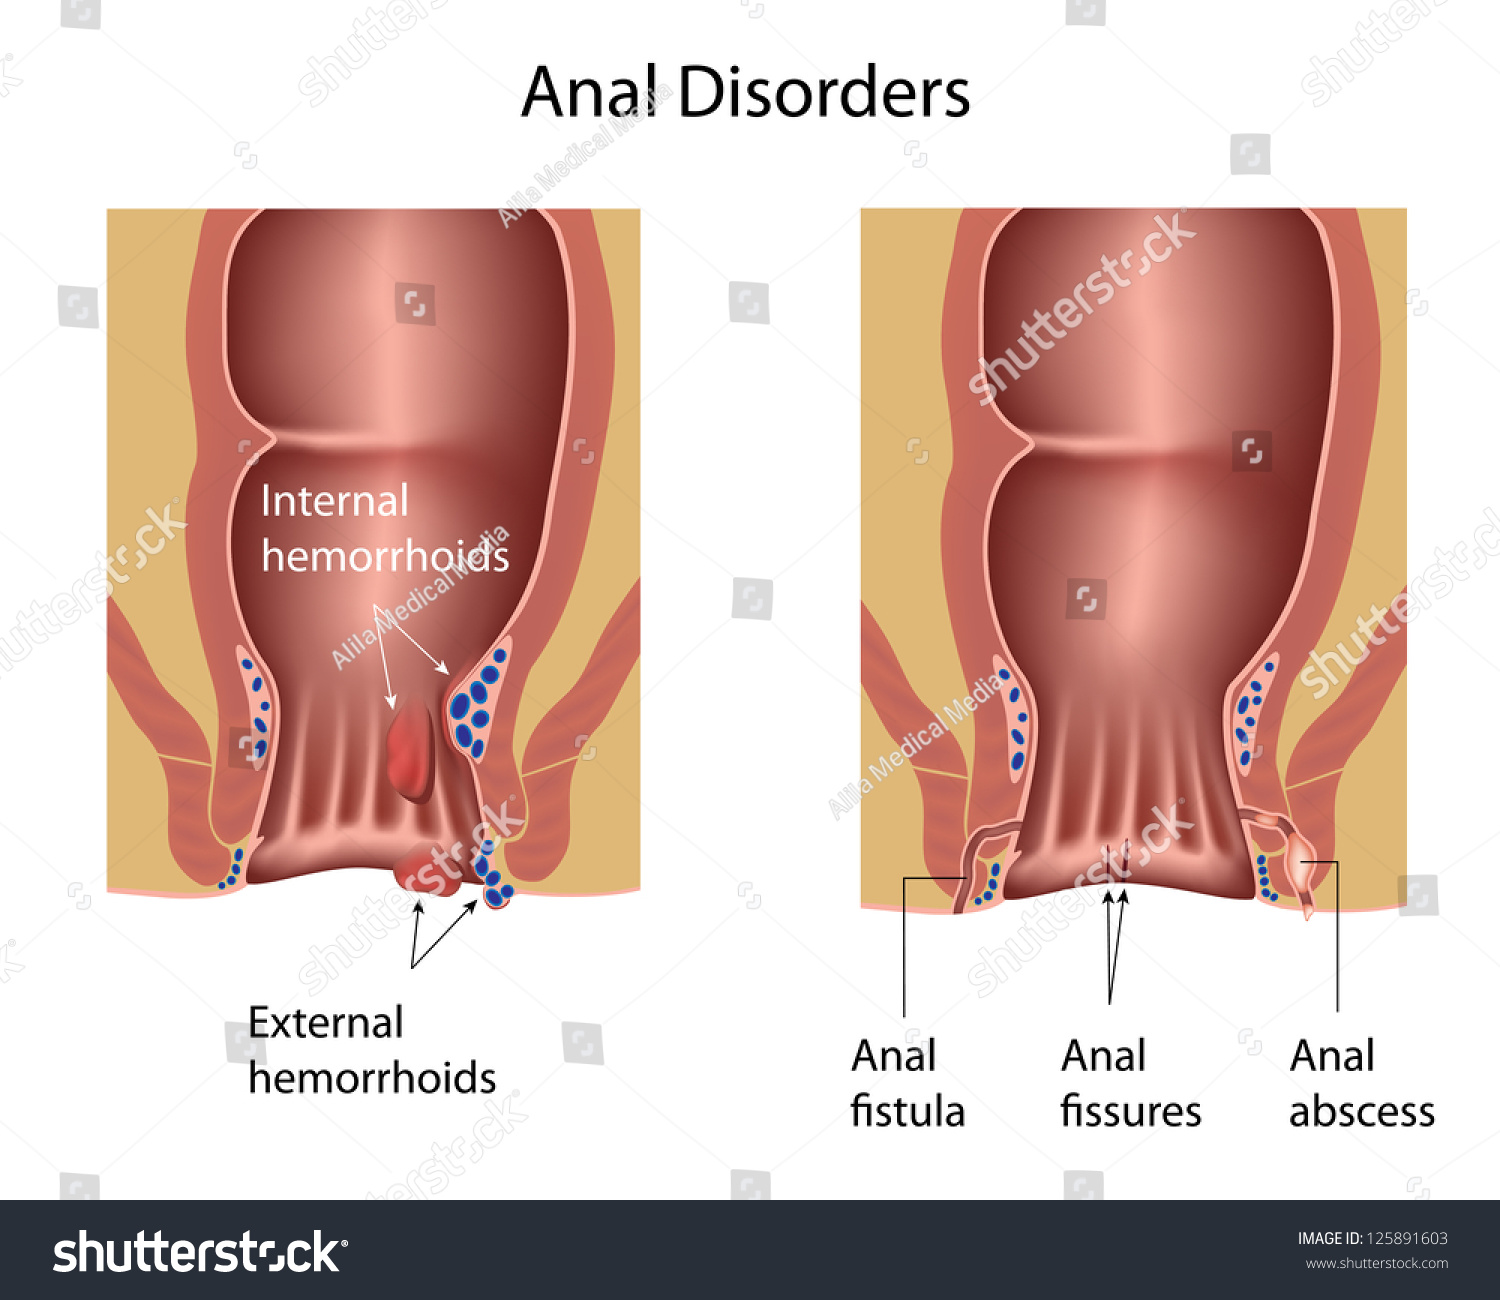 Images Of Anal 17